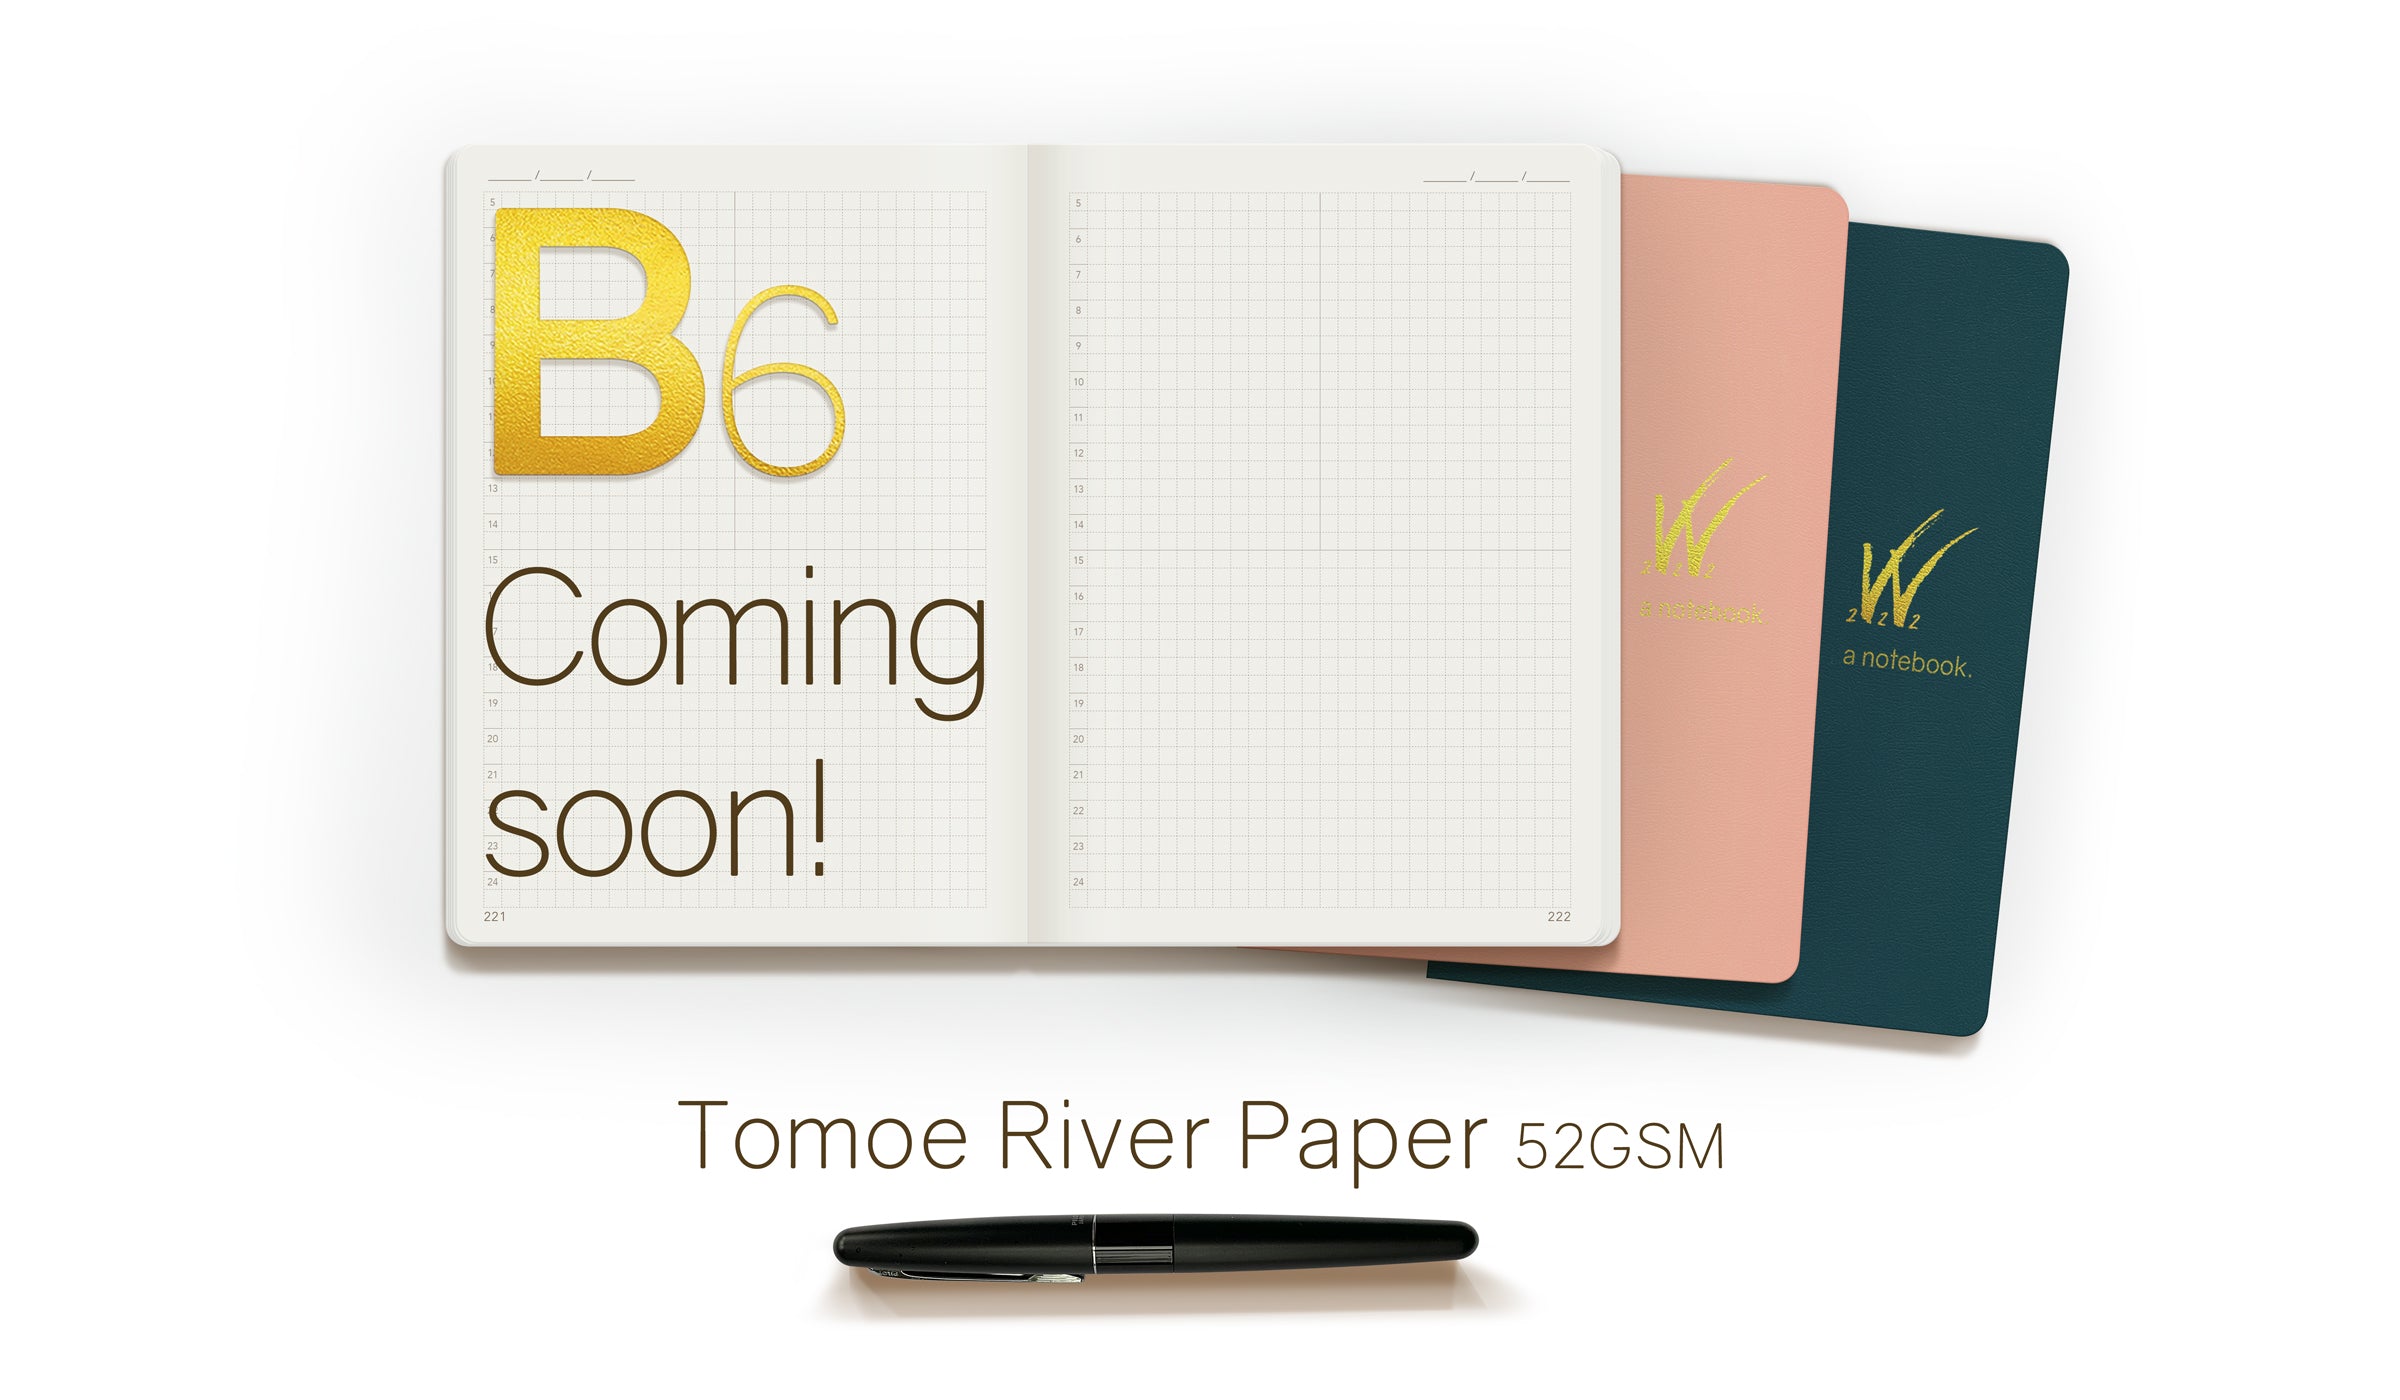 B6 52gsm Tomoe River Paper Notebooks by Wonderland 222 coming soon